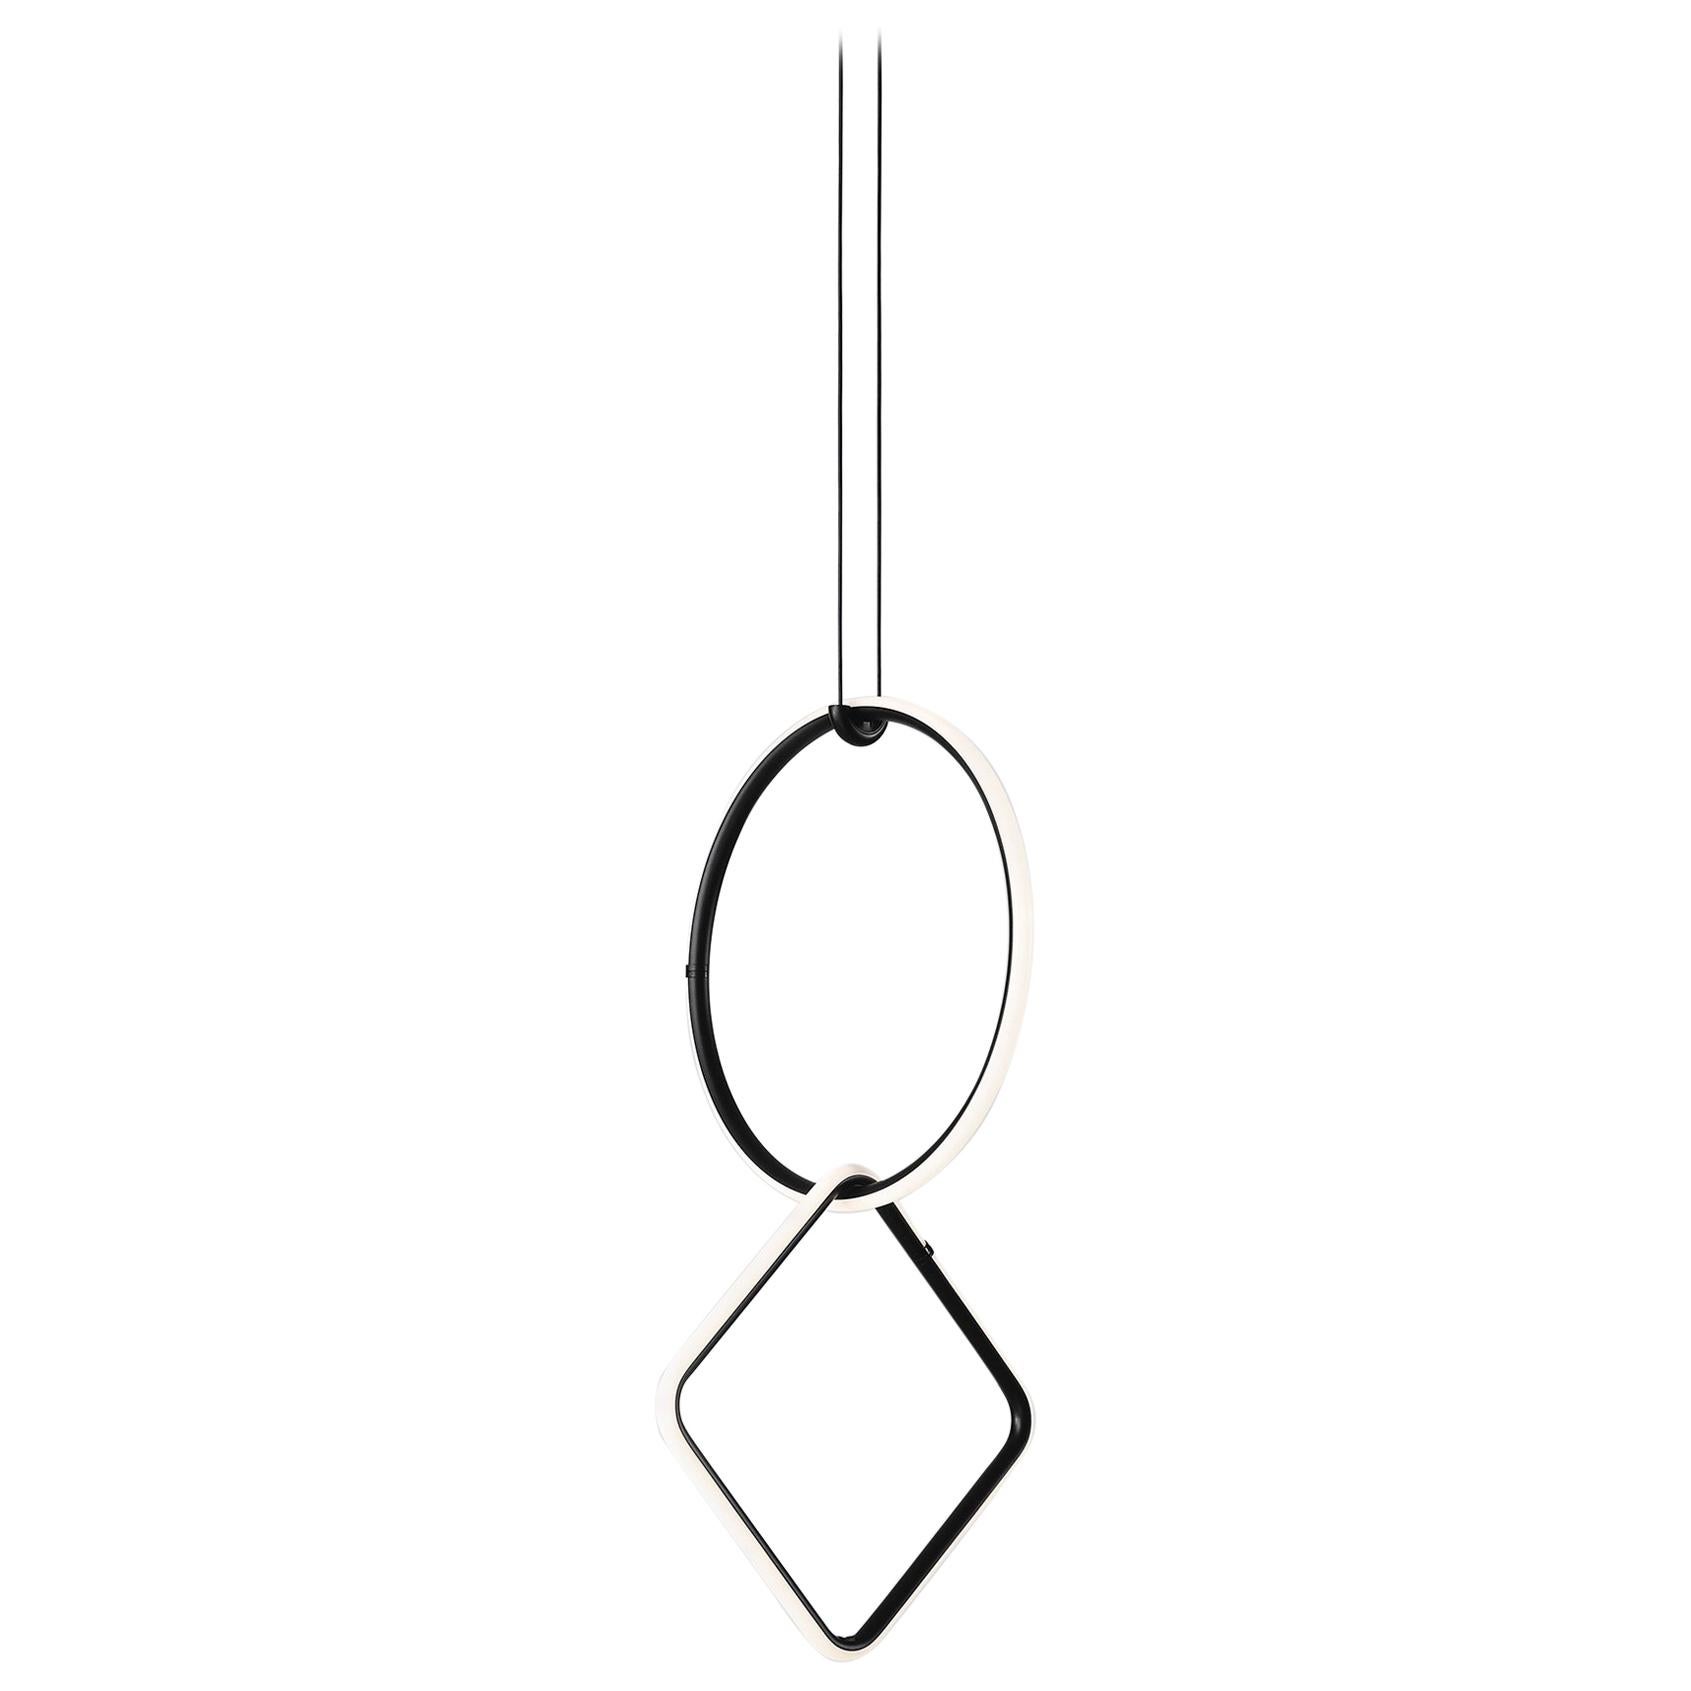 FLOS Small Circle and Line Arrangements Light by Michael Anastassiades For  Sale at 1stDibs